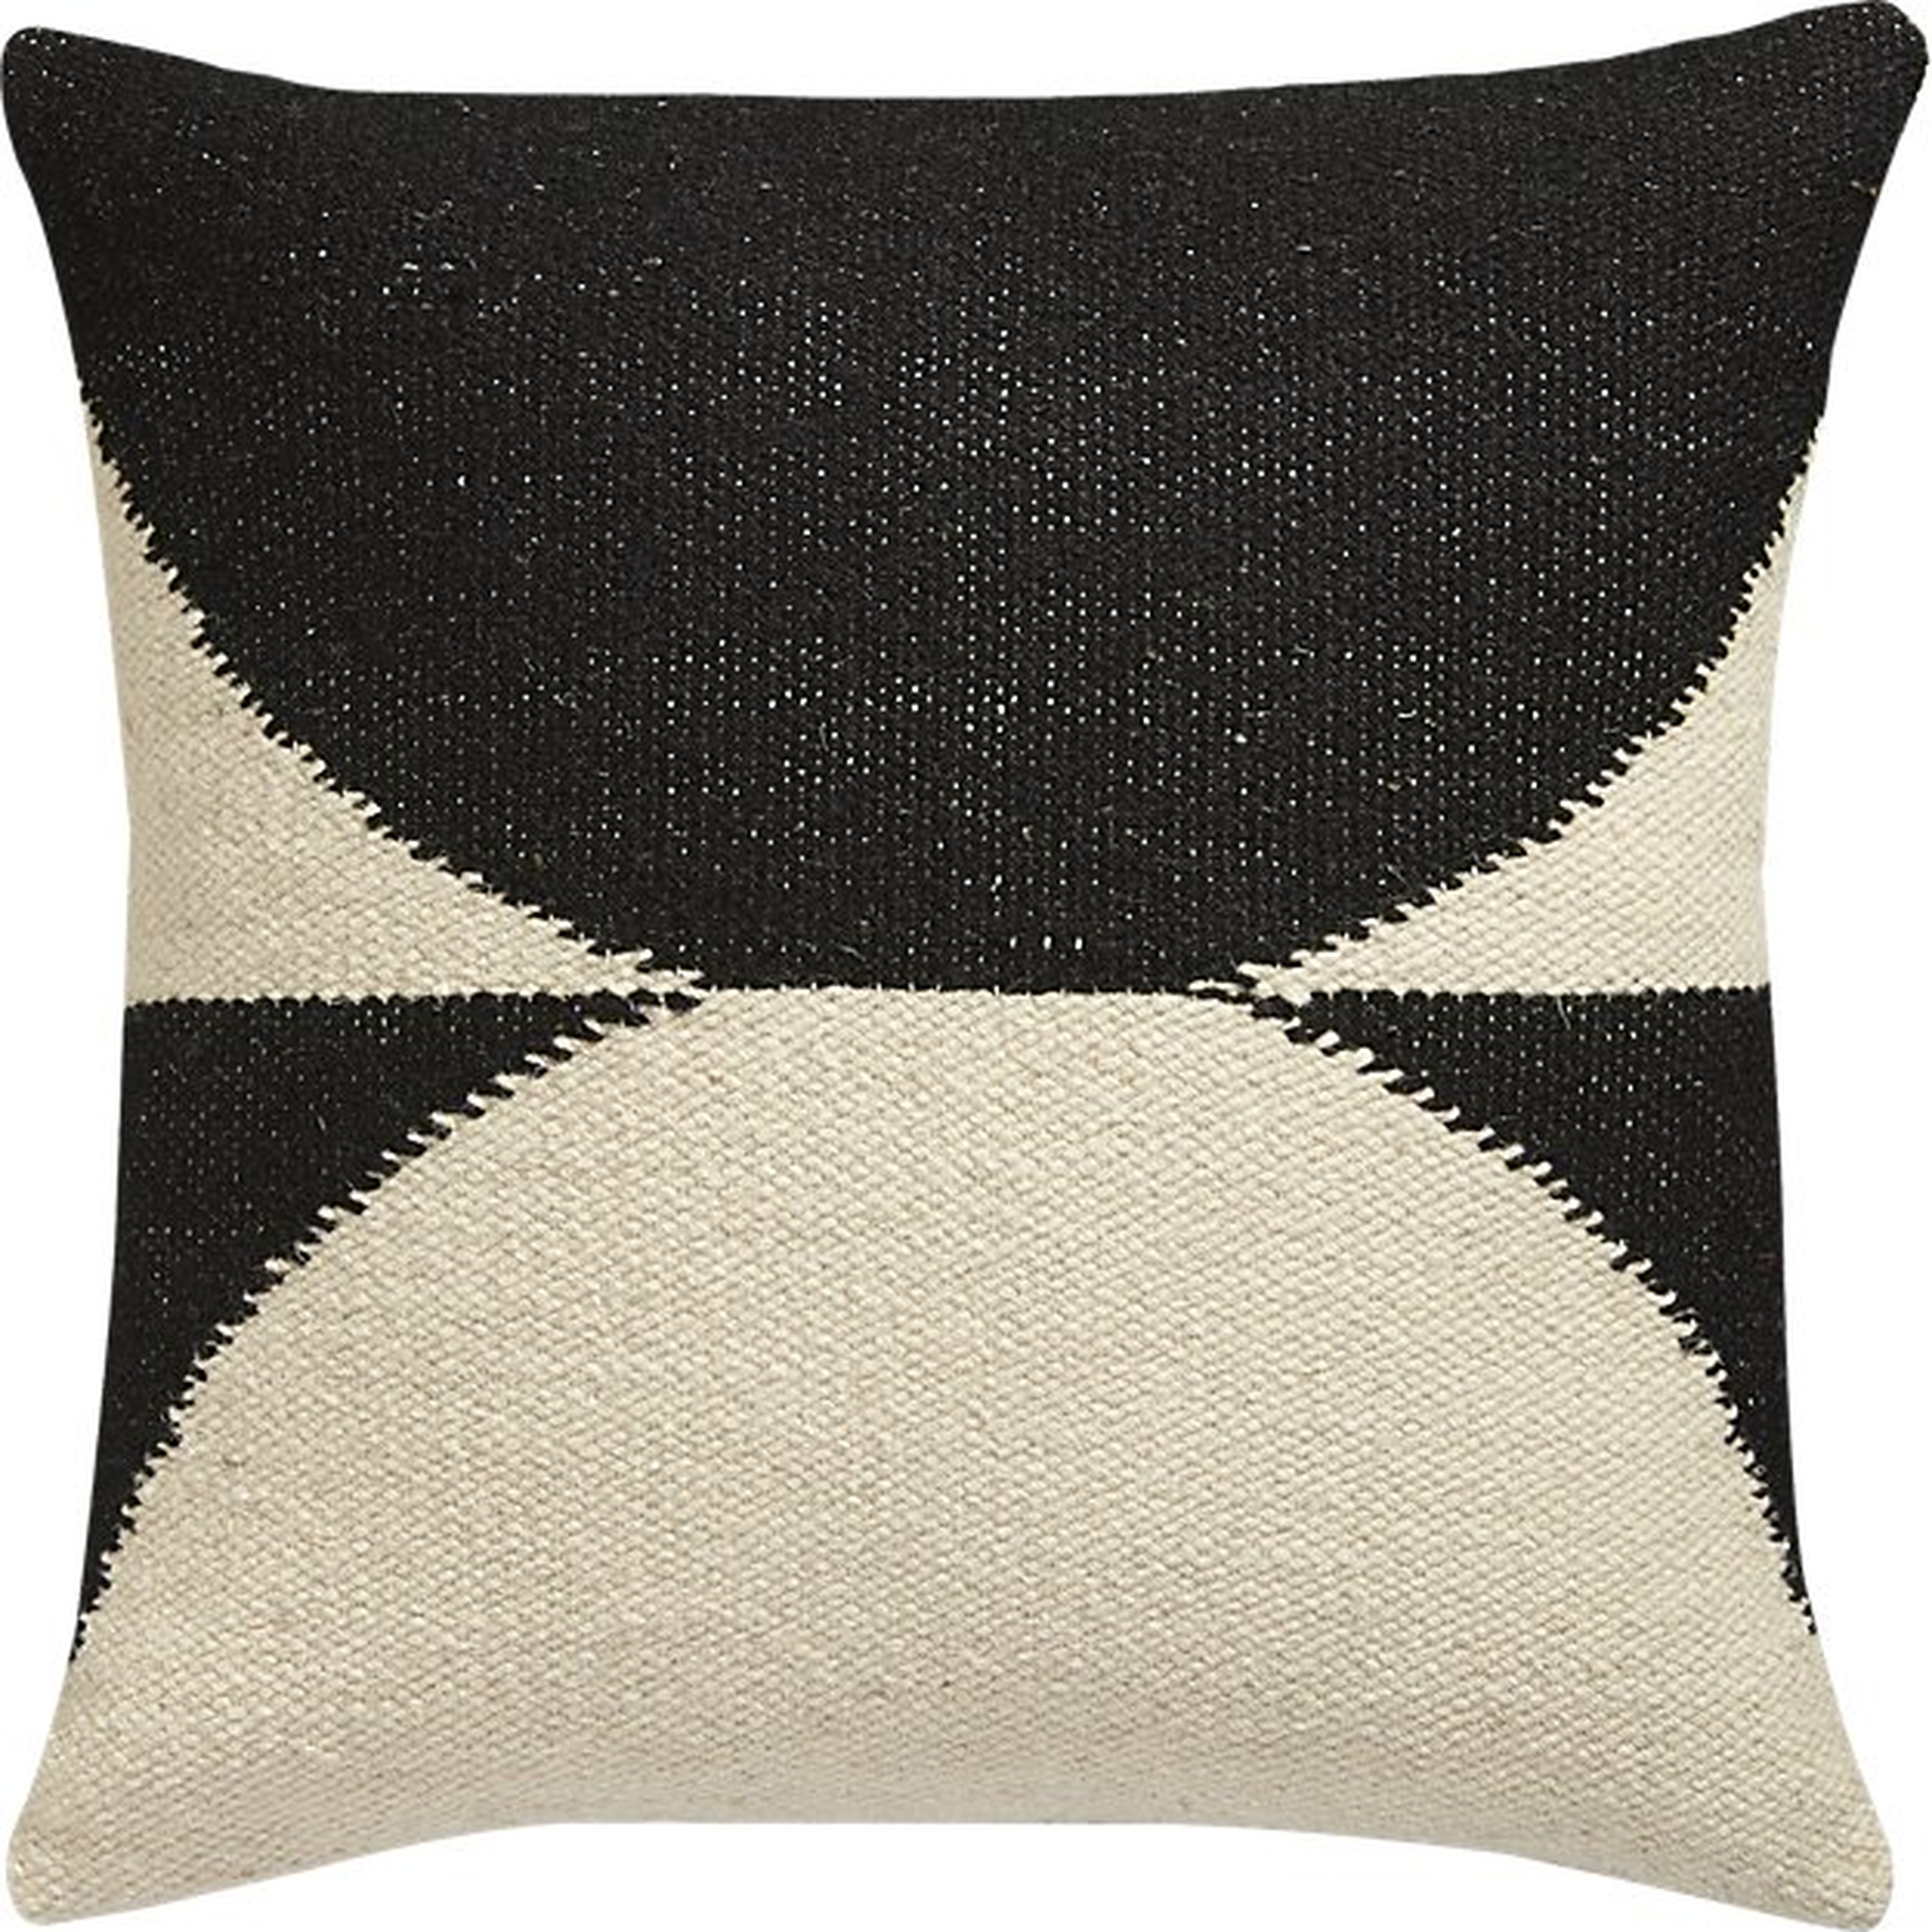 Reflect Pillow with polyester Insert, Black & White, 20" x 20" - CB2